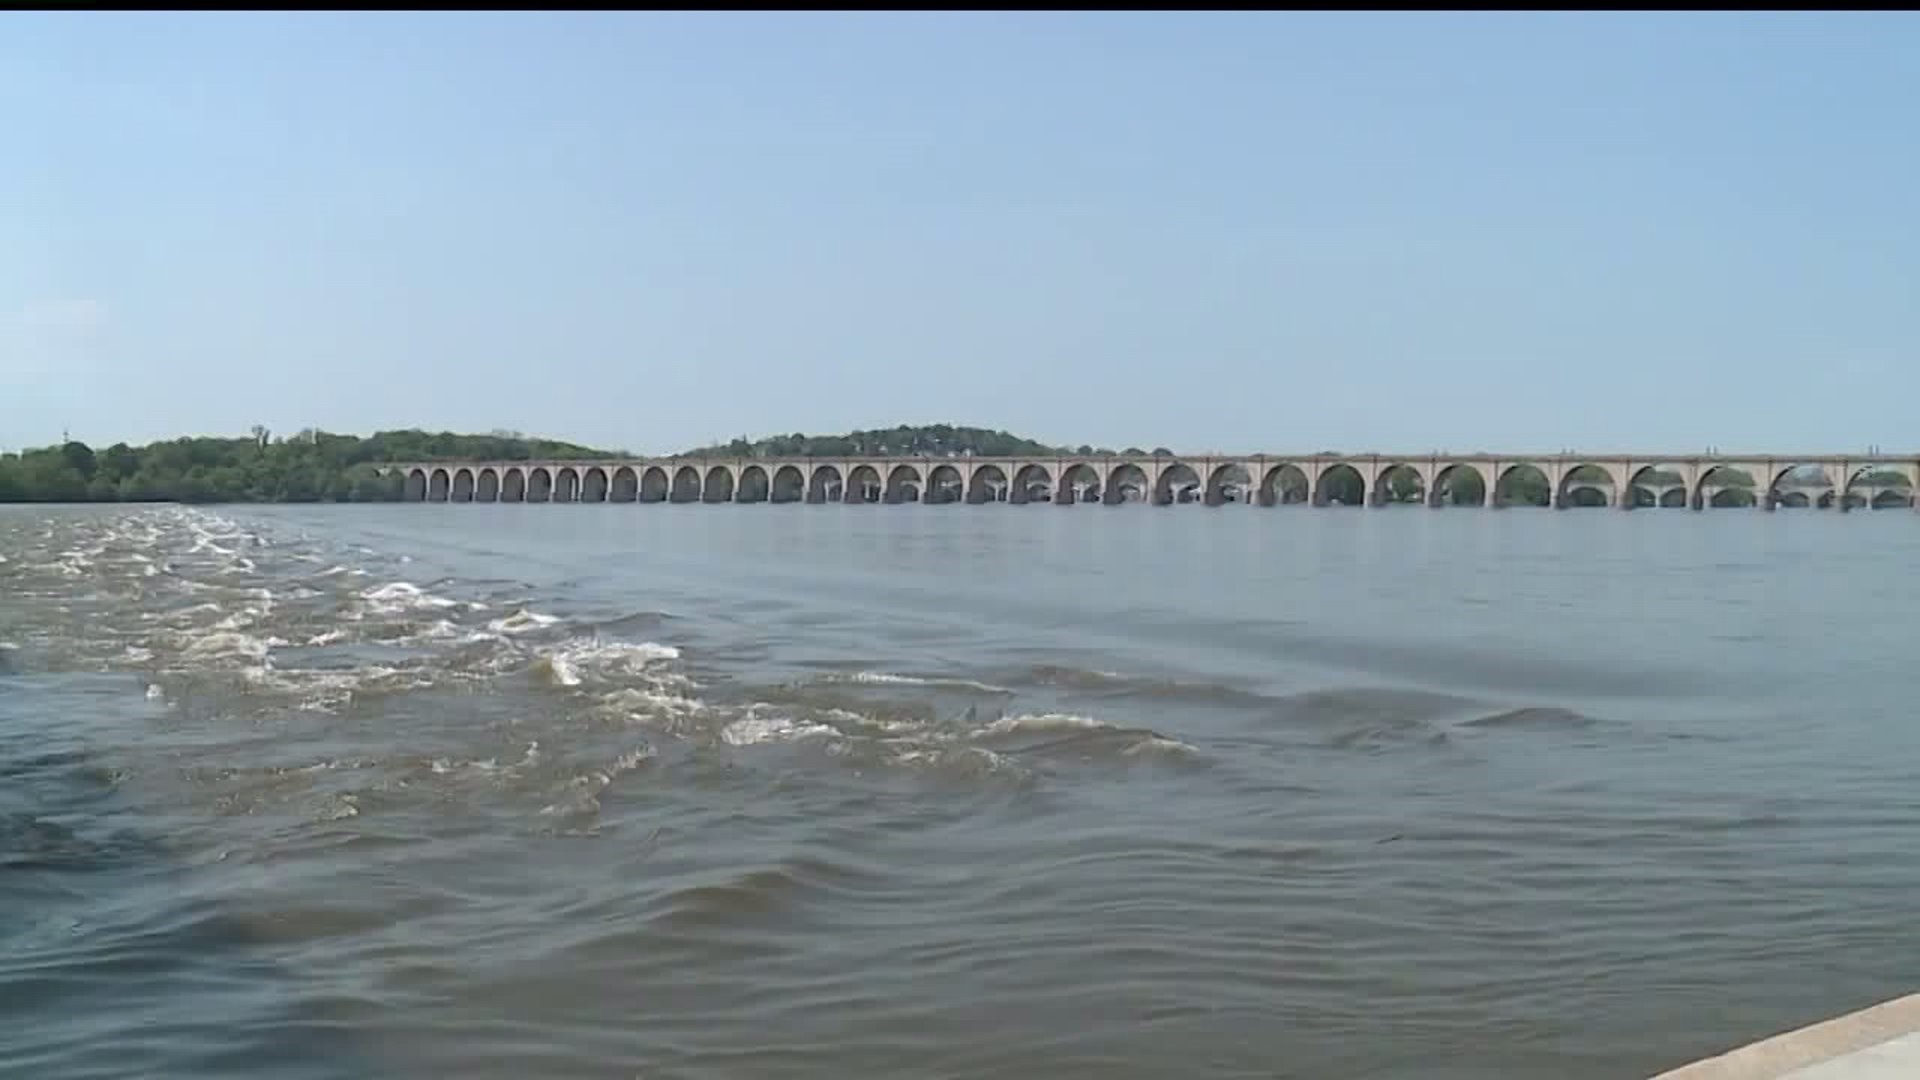 Boat safety along the Susquehanna River